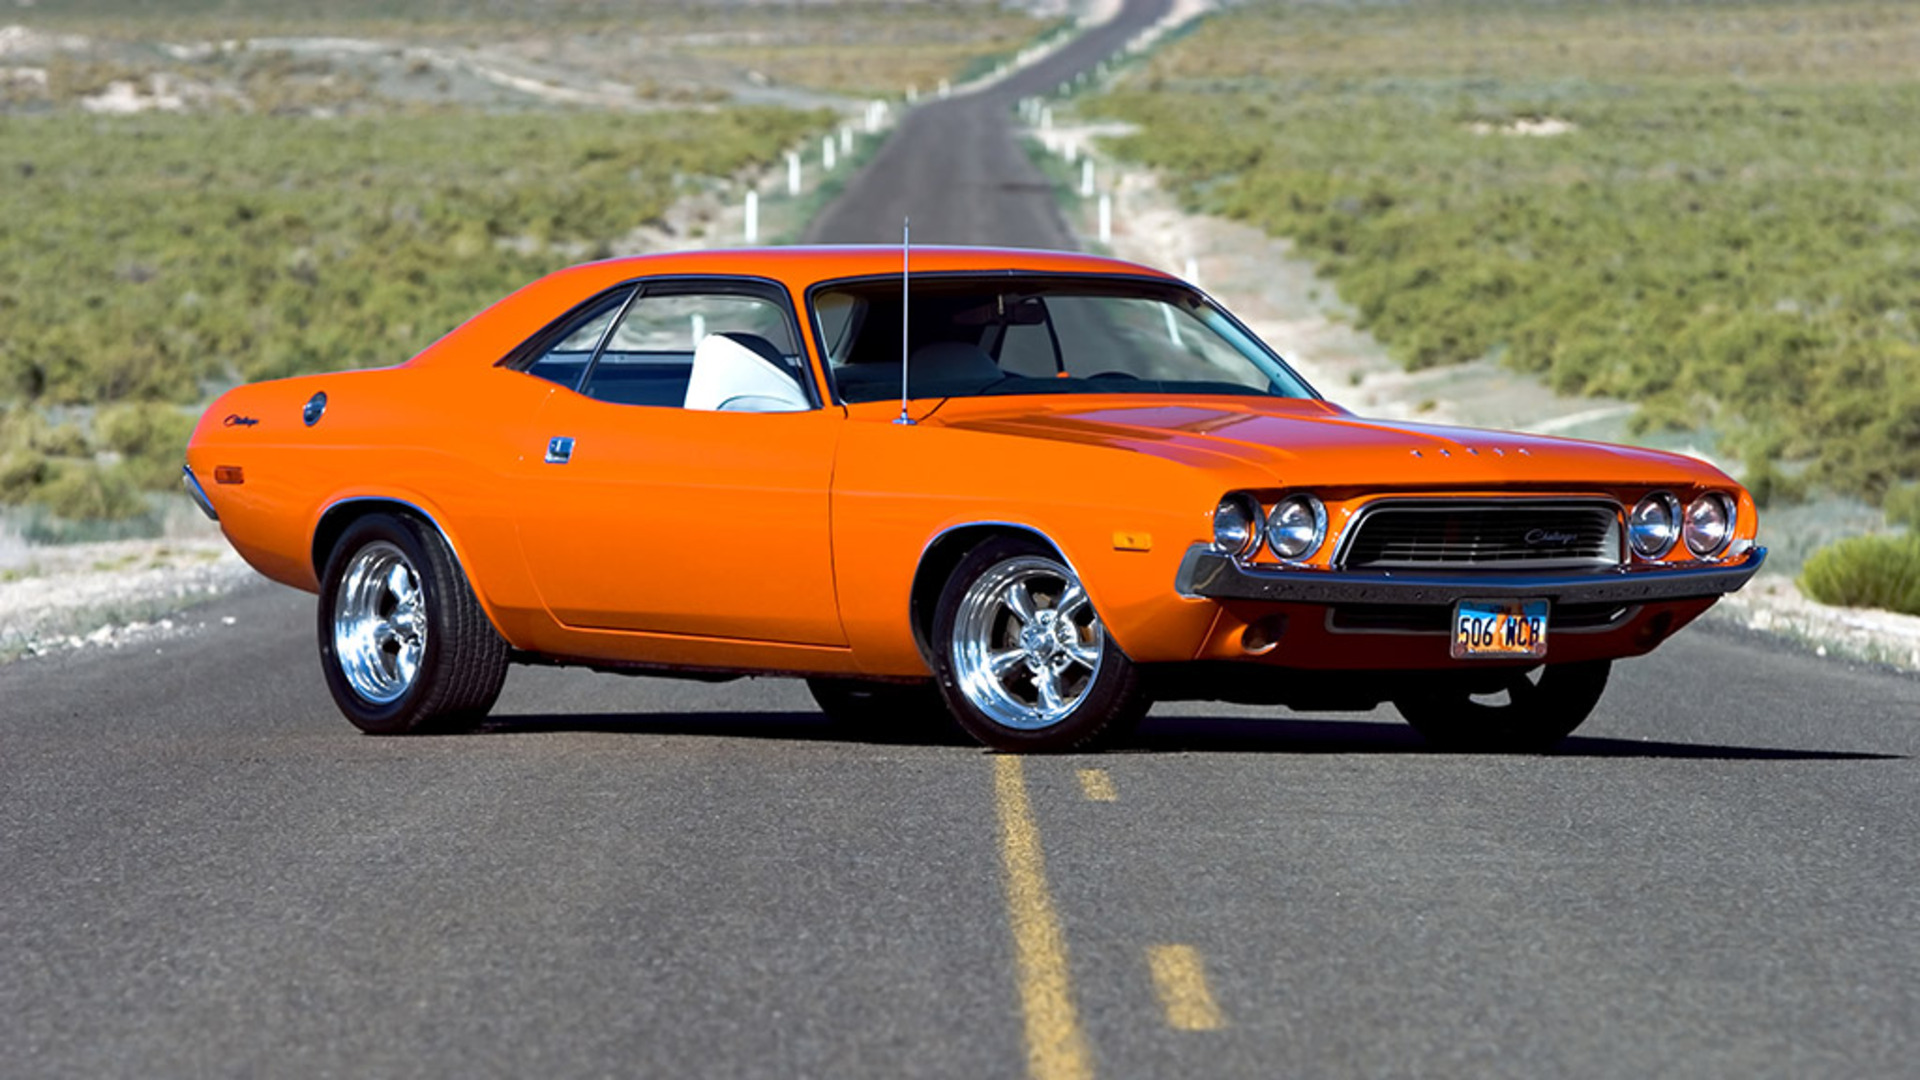 Muscle Cars Wallpaper 1920x1080 Muscle Cars Dodge Challenger